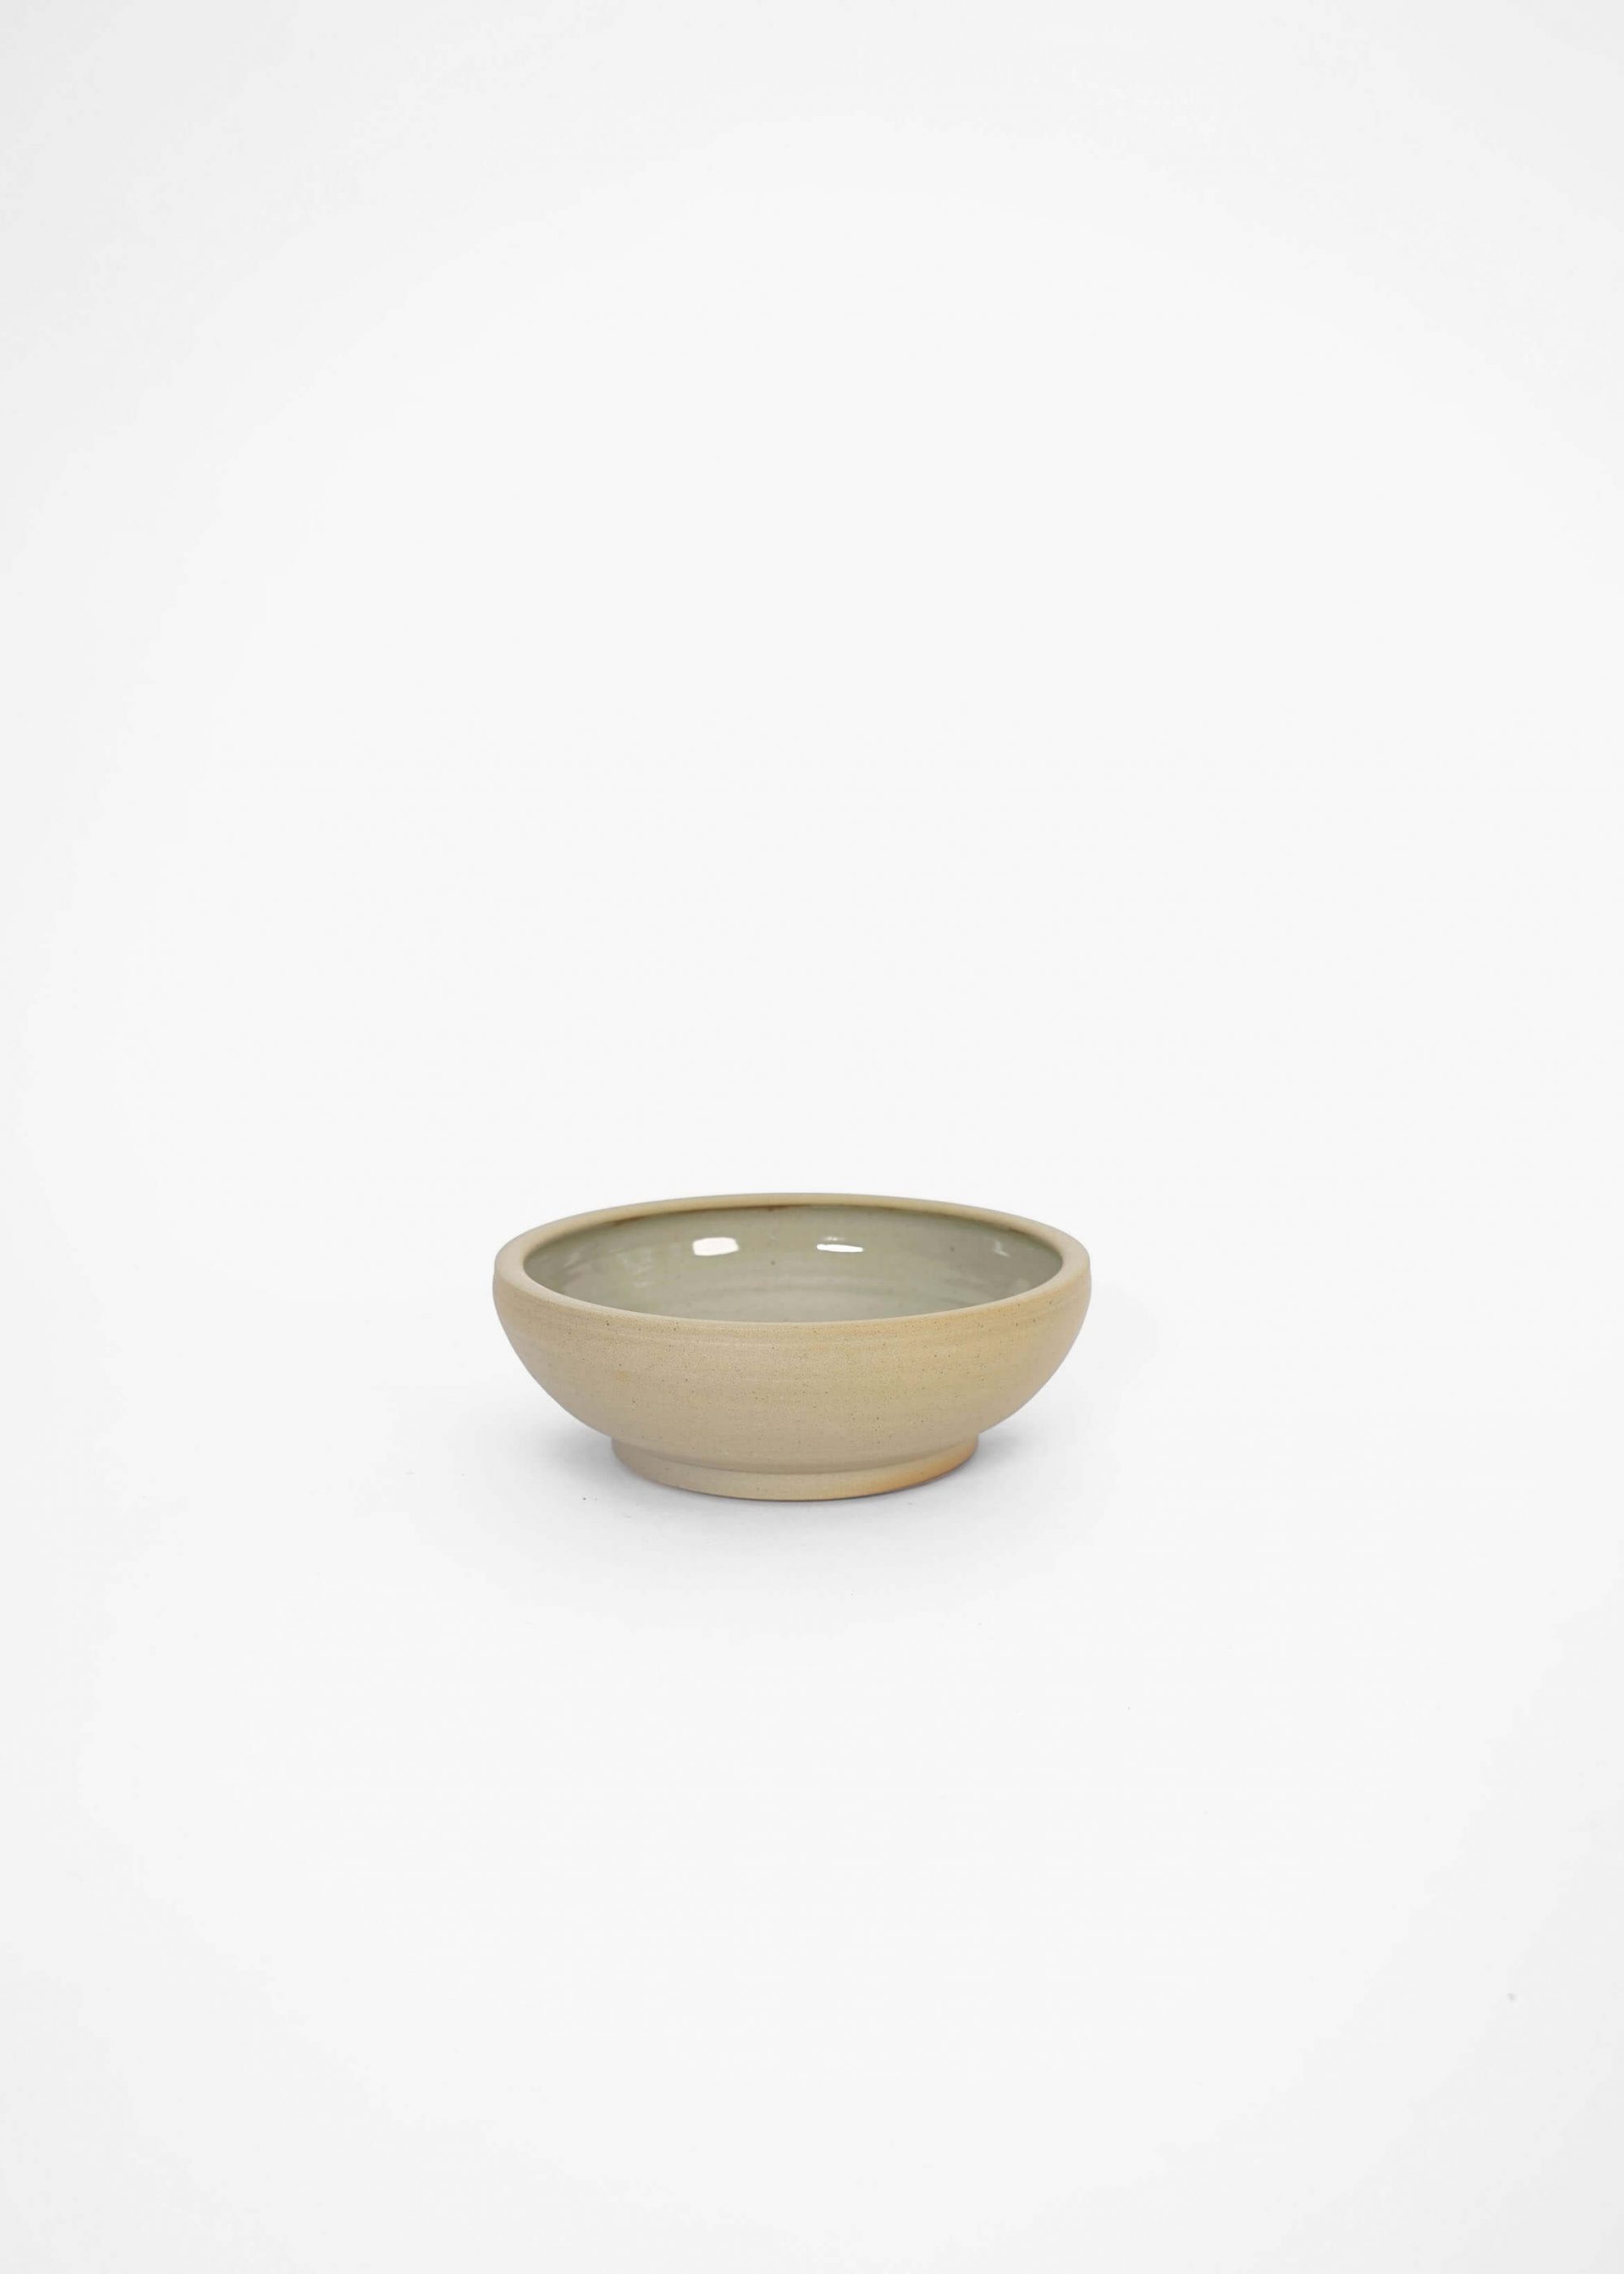 Product image for N° ICSE1 BEUYS Food Bowl